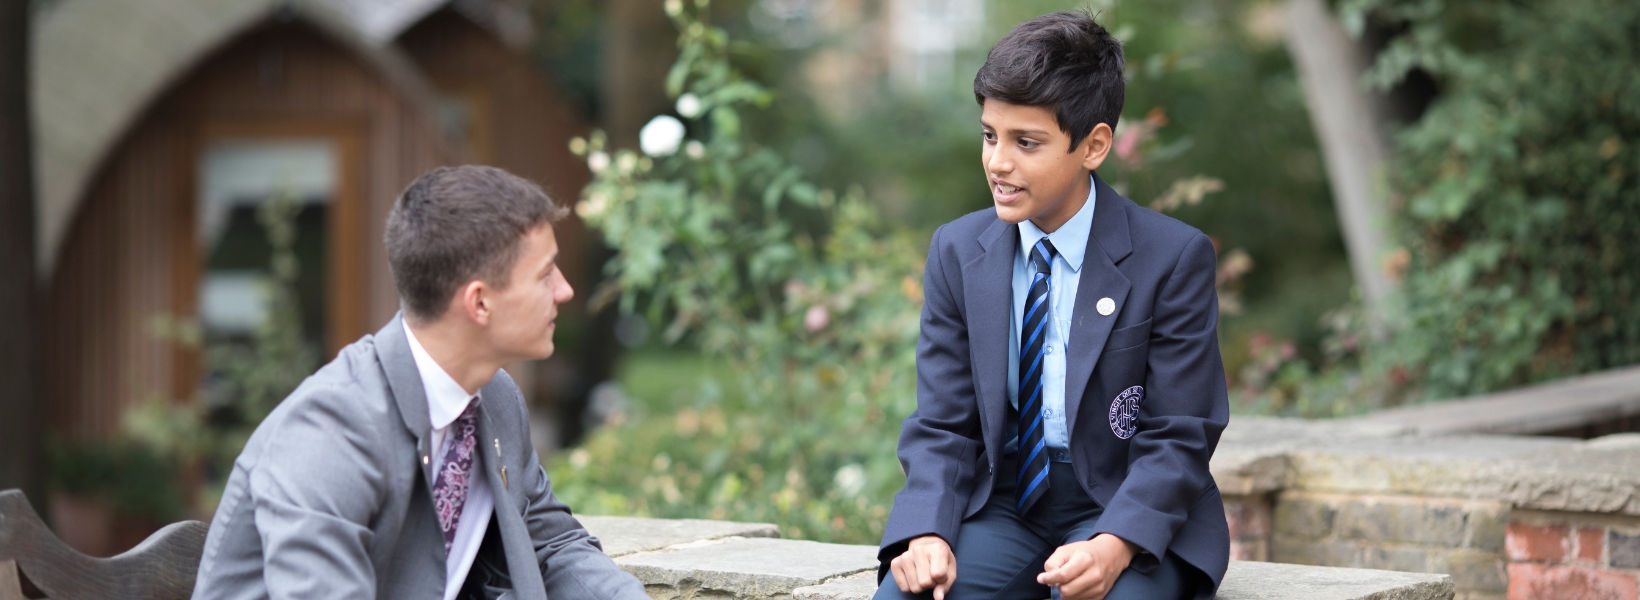 Sixth form pupil talking to a senior pupil at Ibstock Place School, a private school near Richmond, Barnes, Putney, Kingston, and Wandsworth.